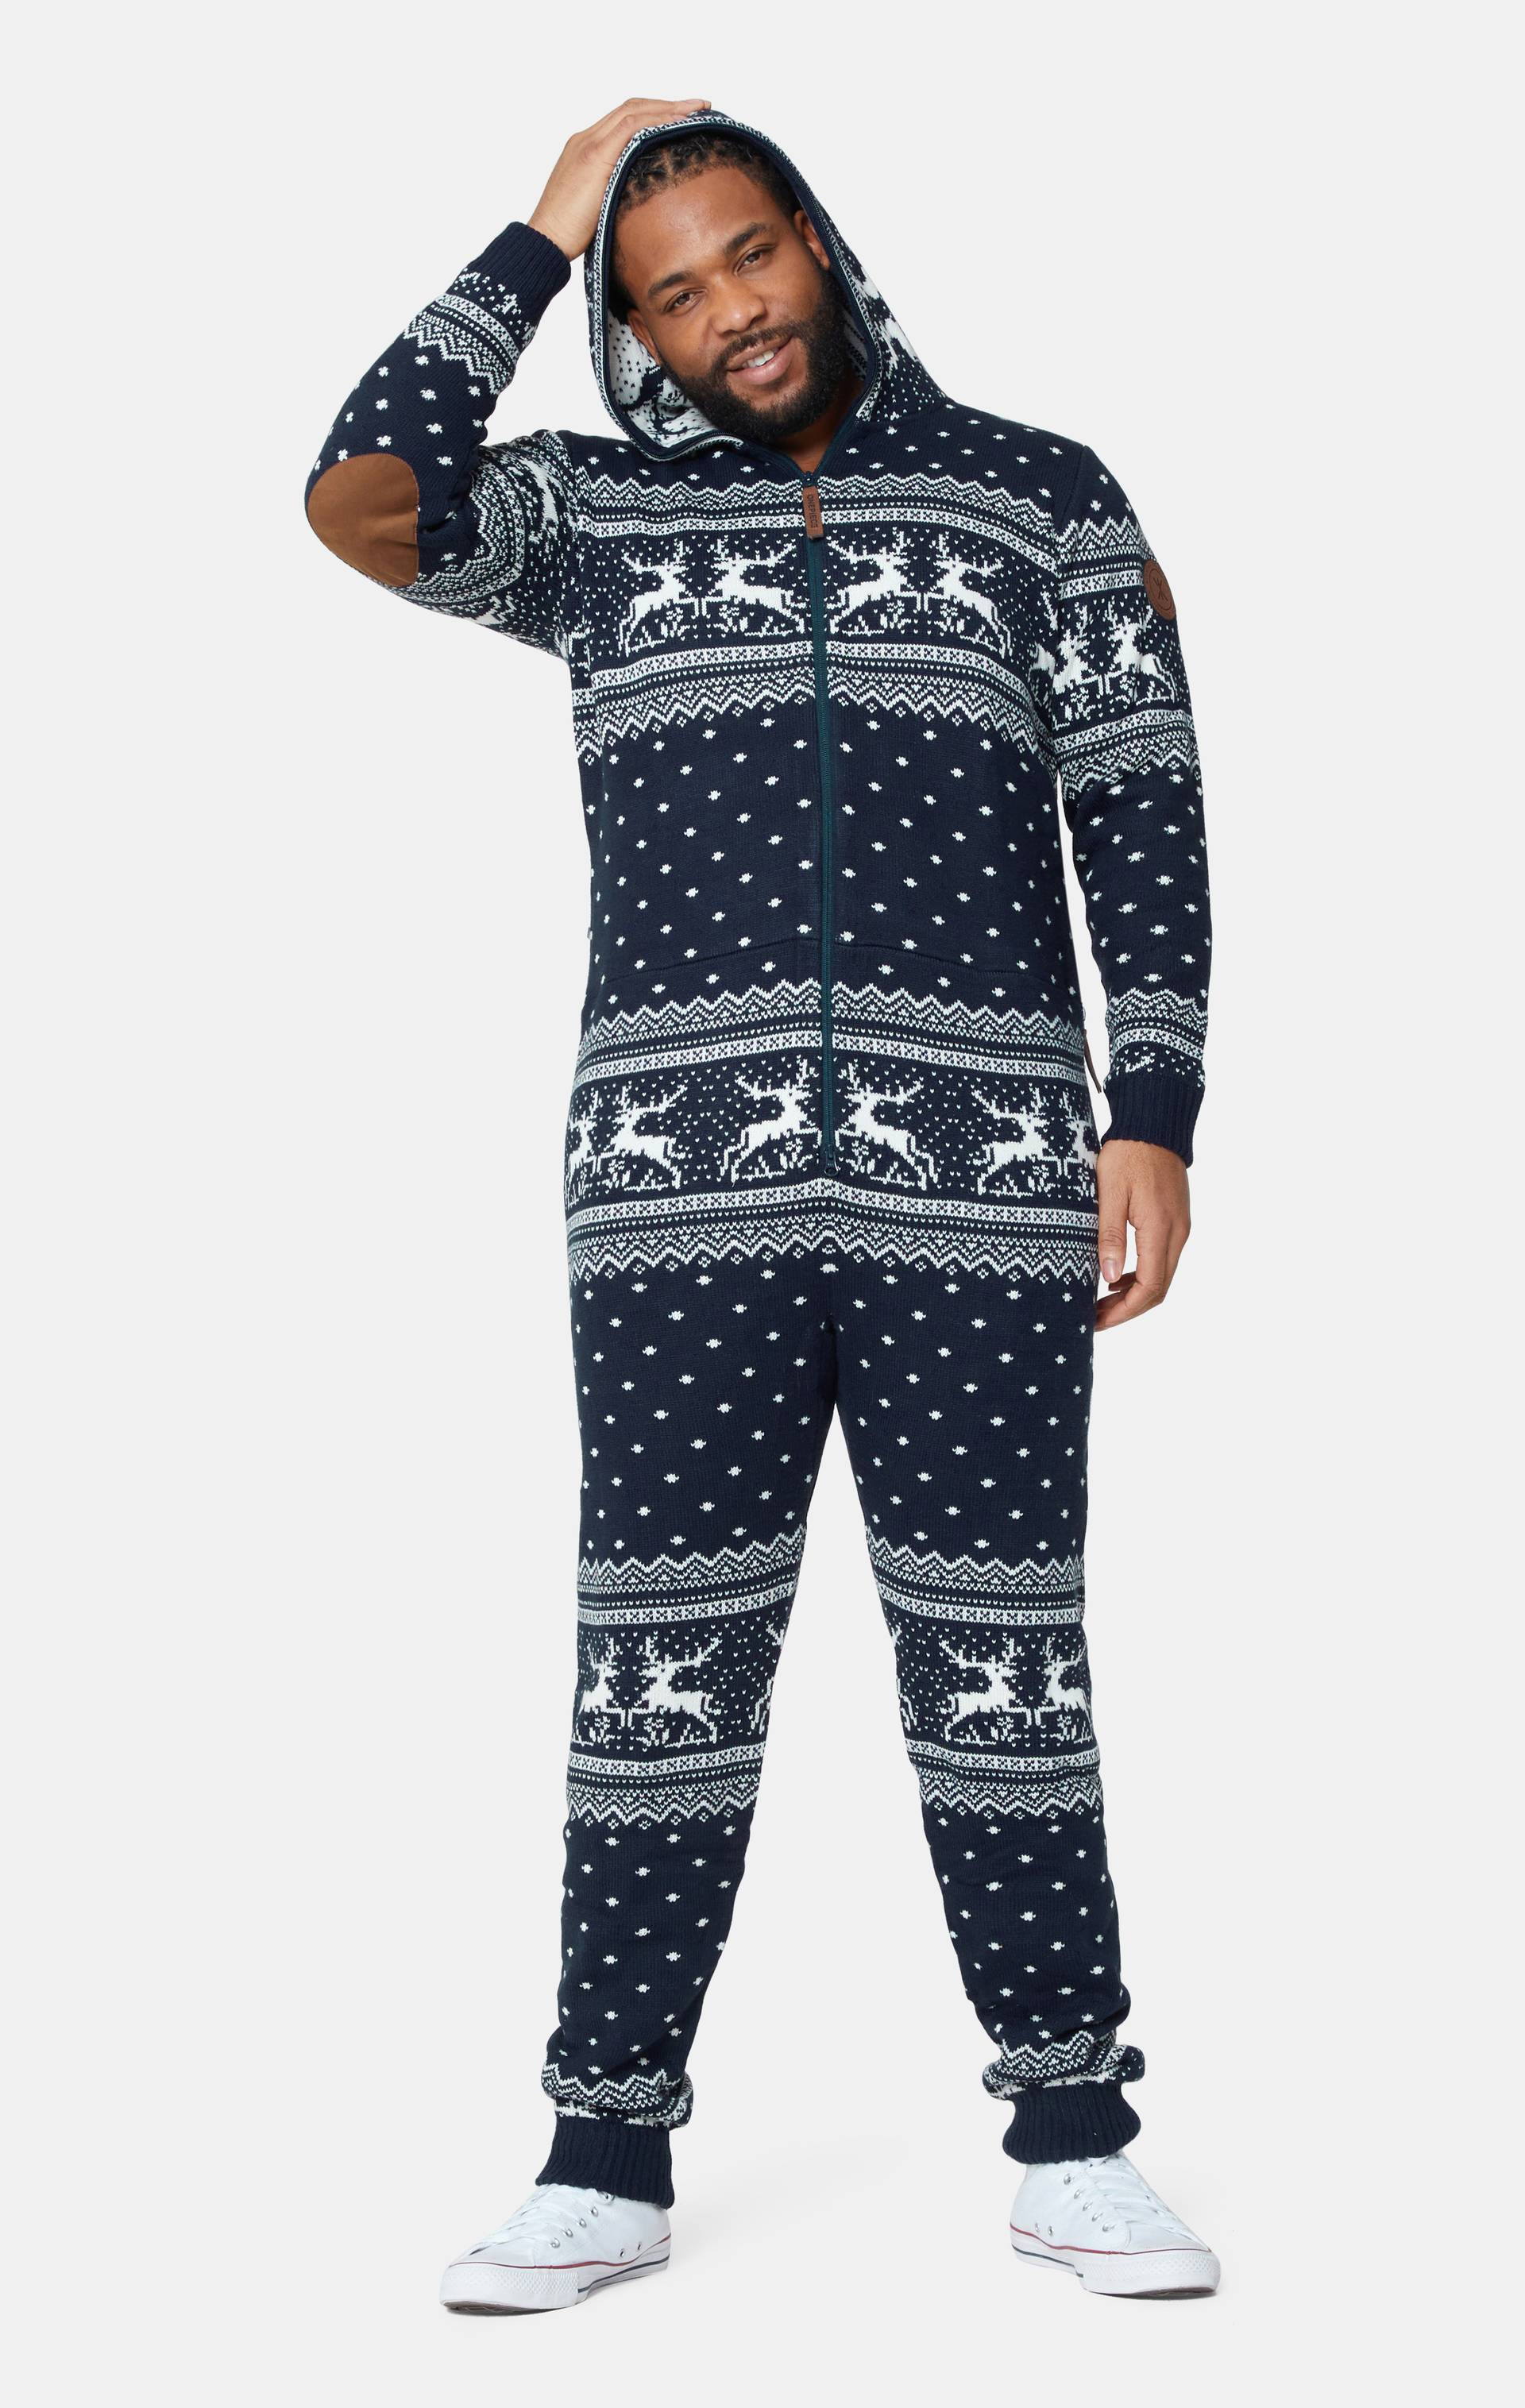 Onepiece Holidays Are Coming Onesie Jumpsuit Navy - 8